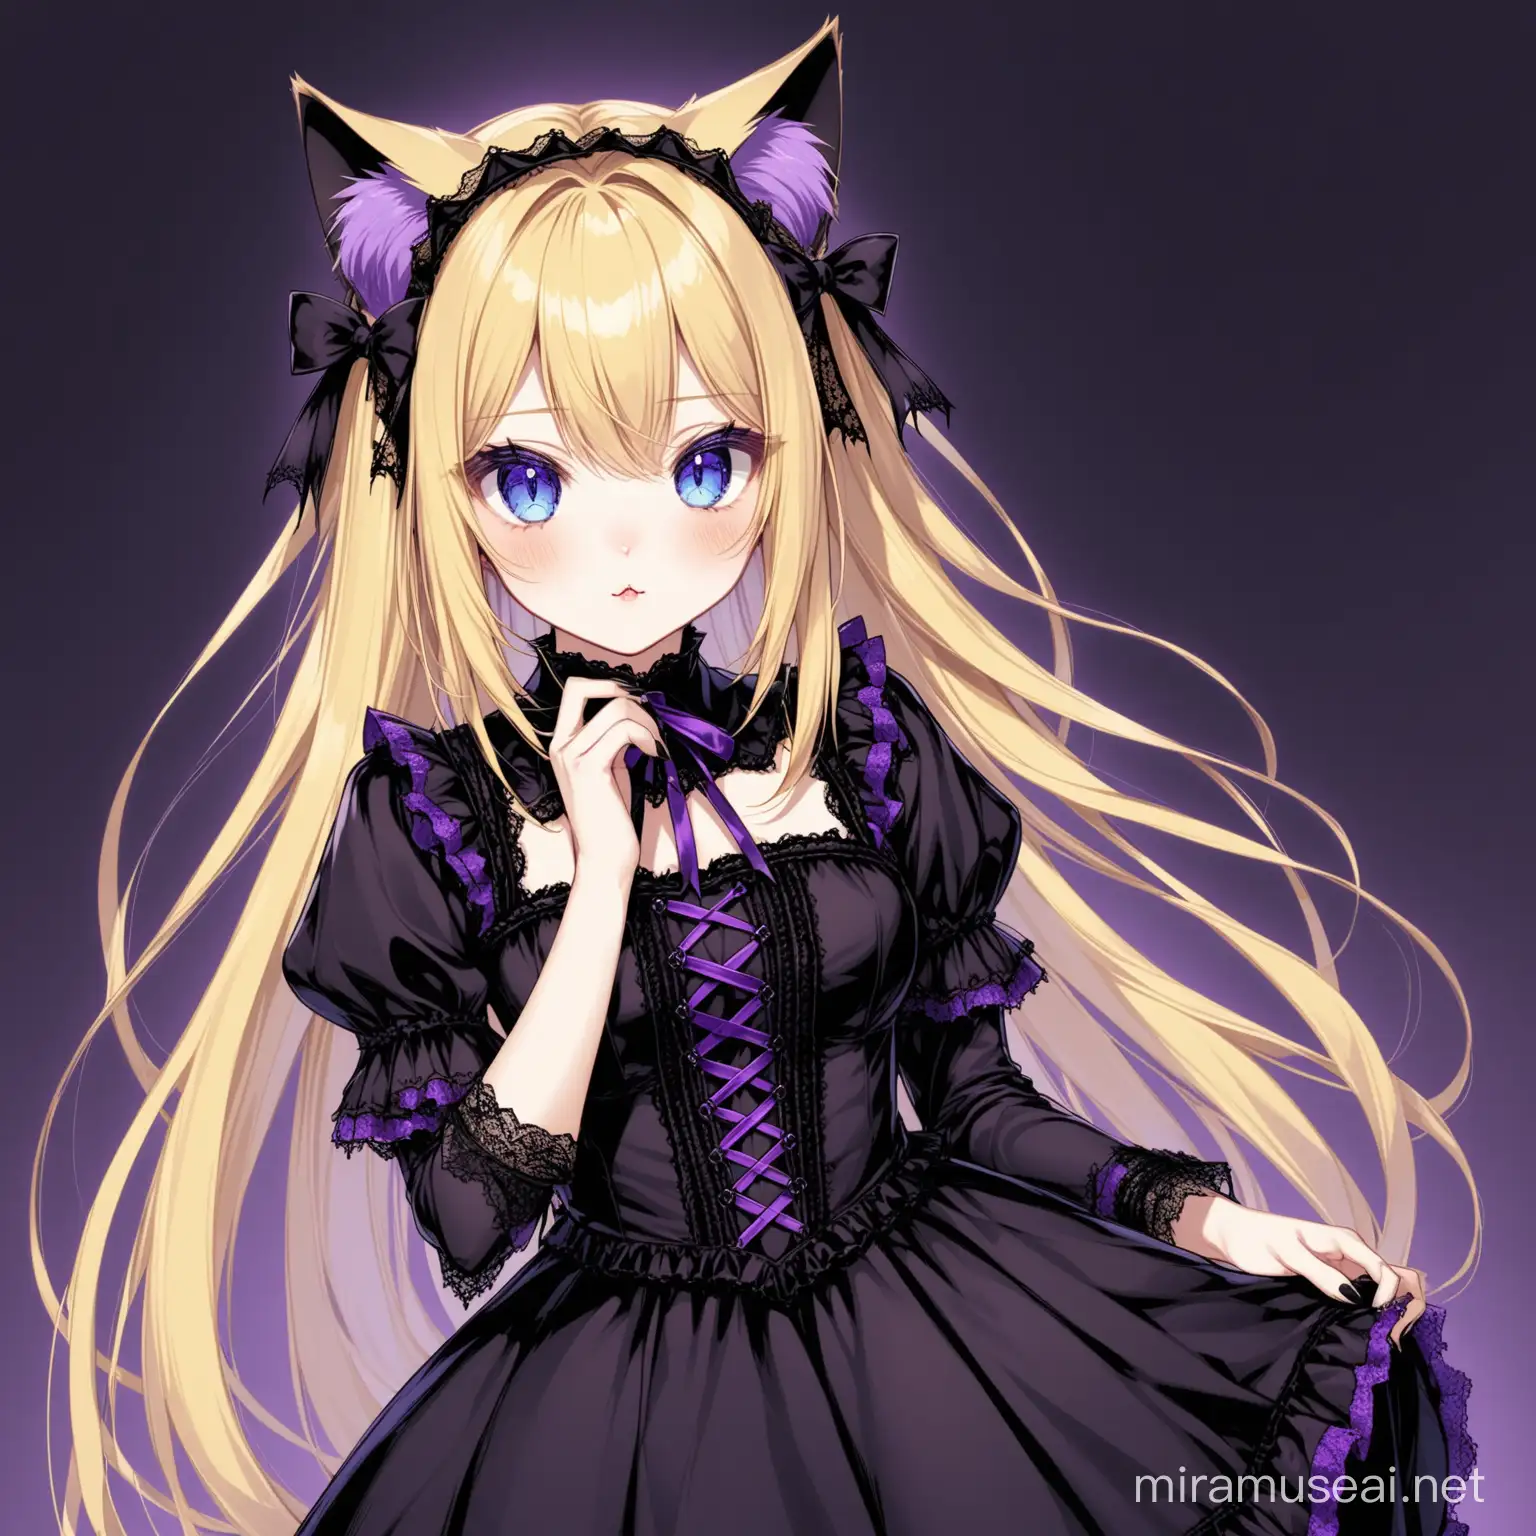 Woman in Gothic Dress with Purple Cat Ears and Long Blonde Hair